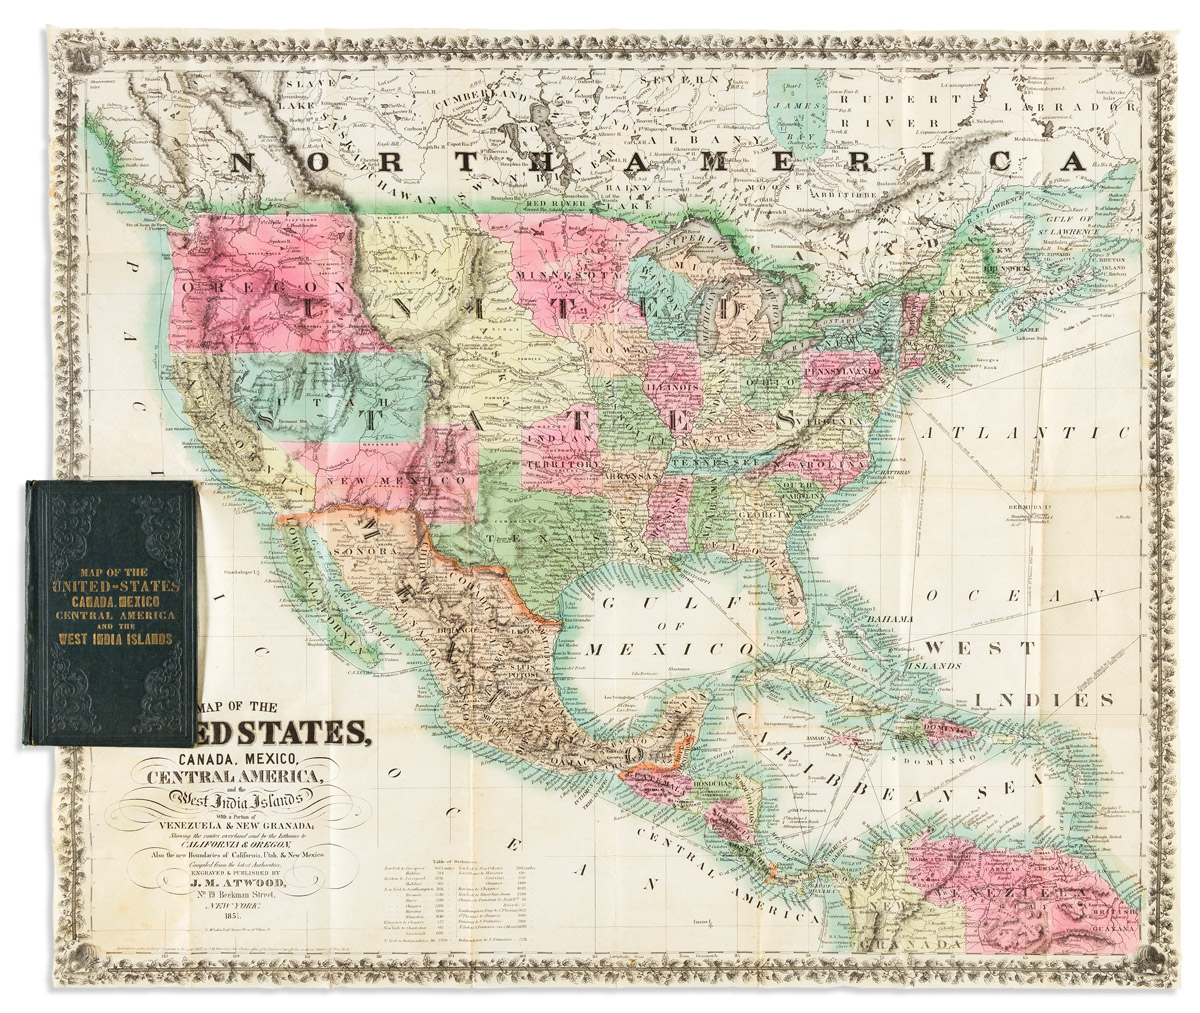 Map of the United States, Canada, Mexico, Central America, and the West India Islands